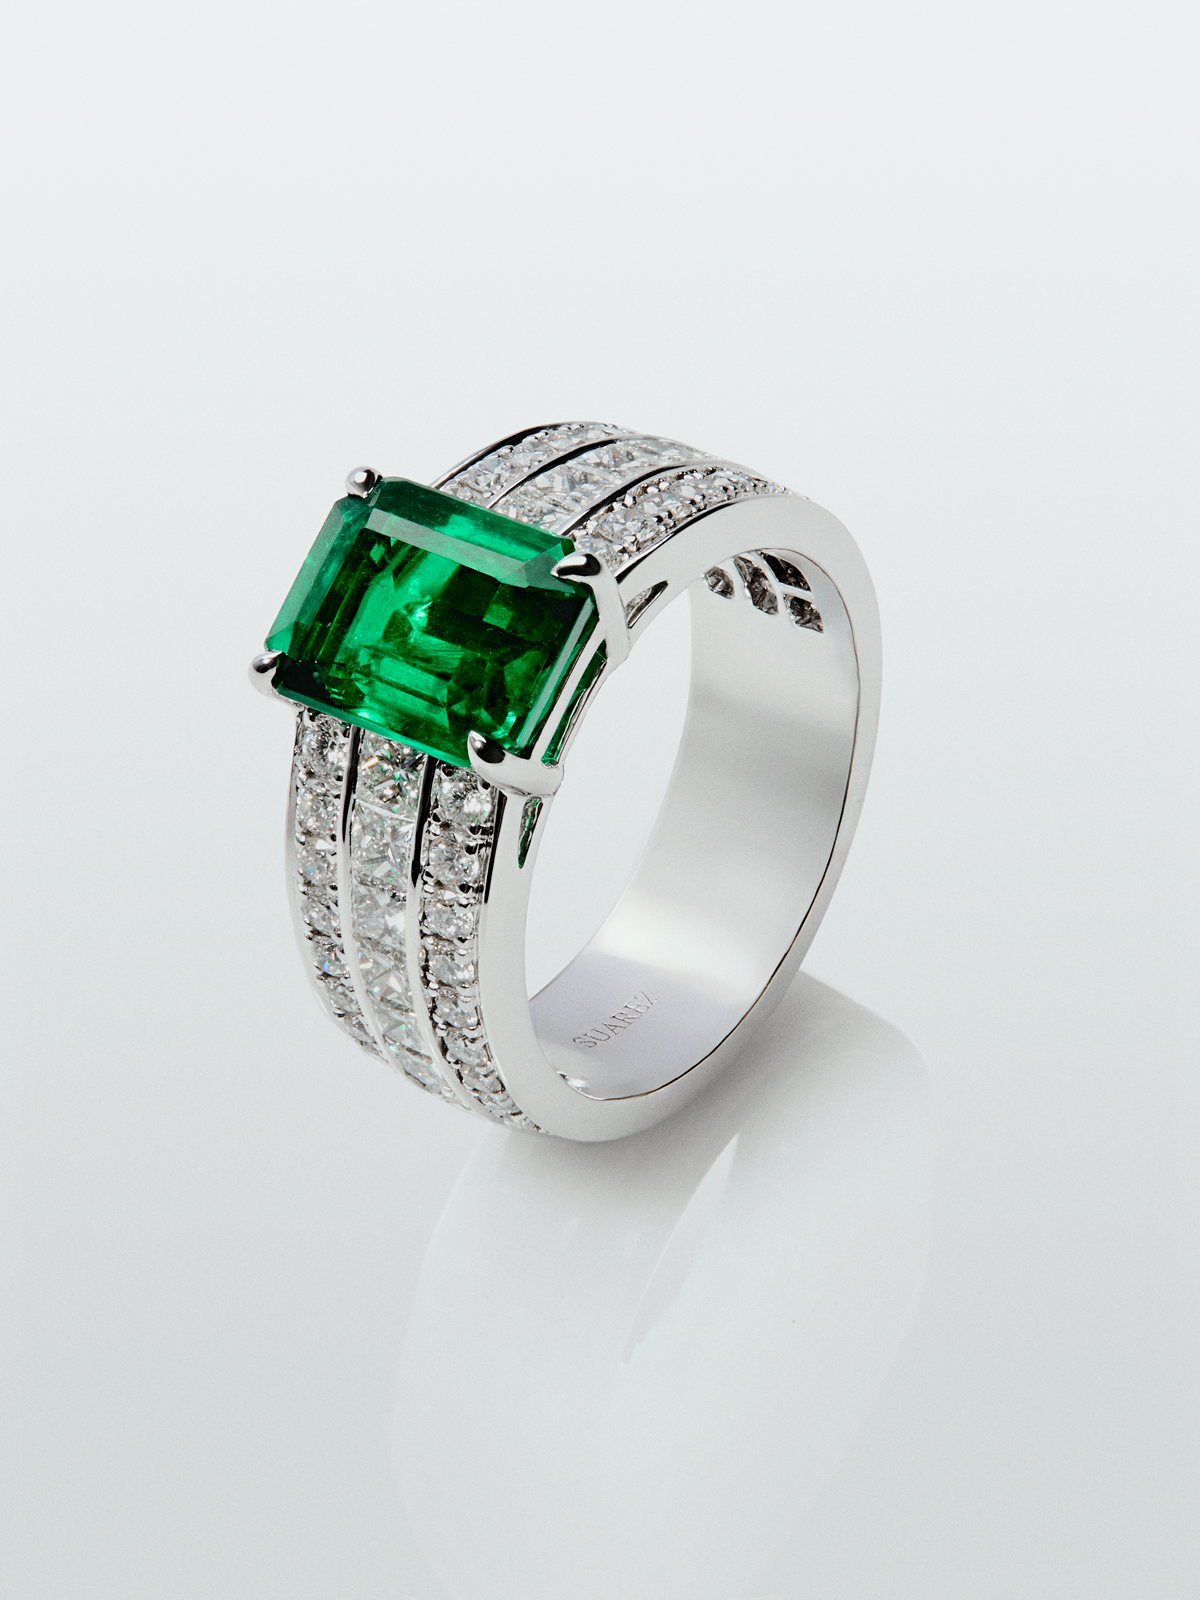 18K white gold ring with octagonal cut emerald of 2.522 cts, 44 brilliant cut diamonds with a total of 0.81 cts and 12 princess cut diamonds with a total of 0.76 cts